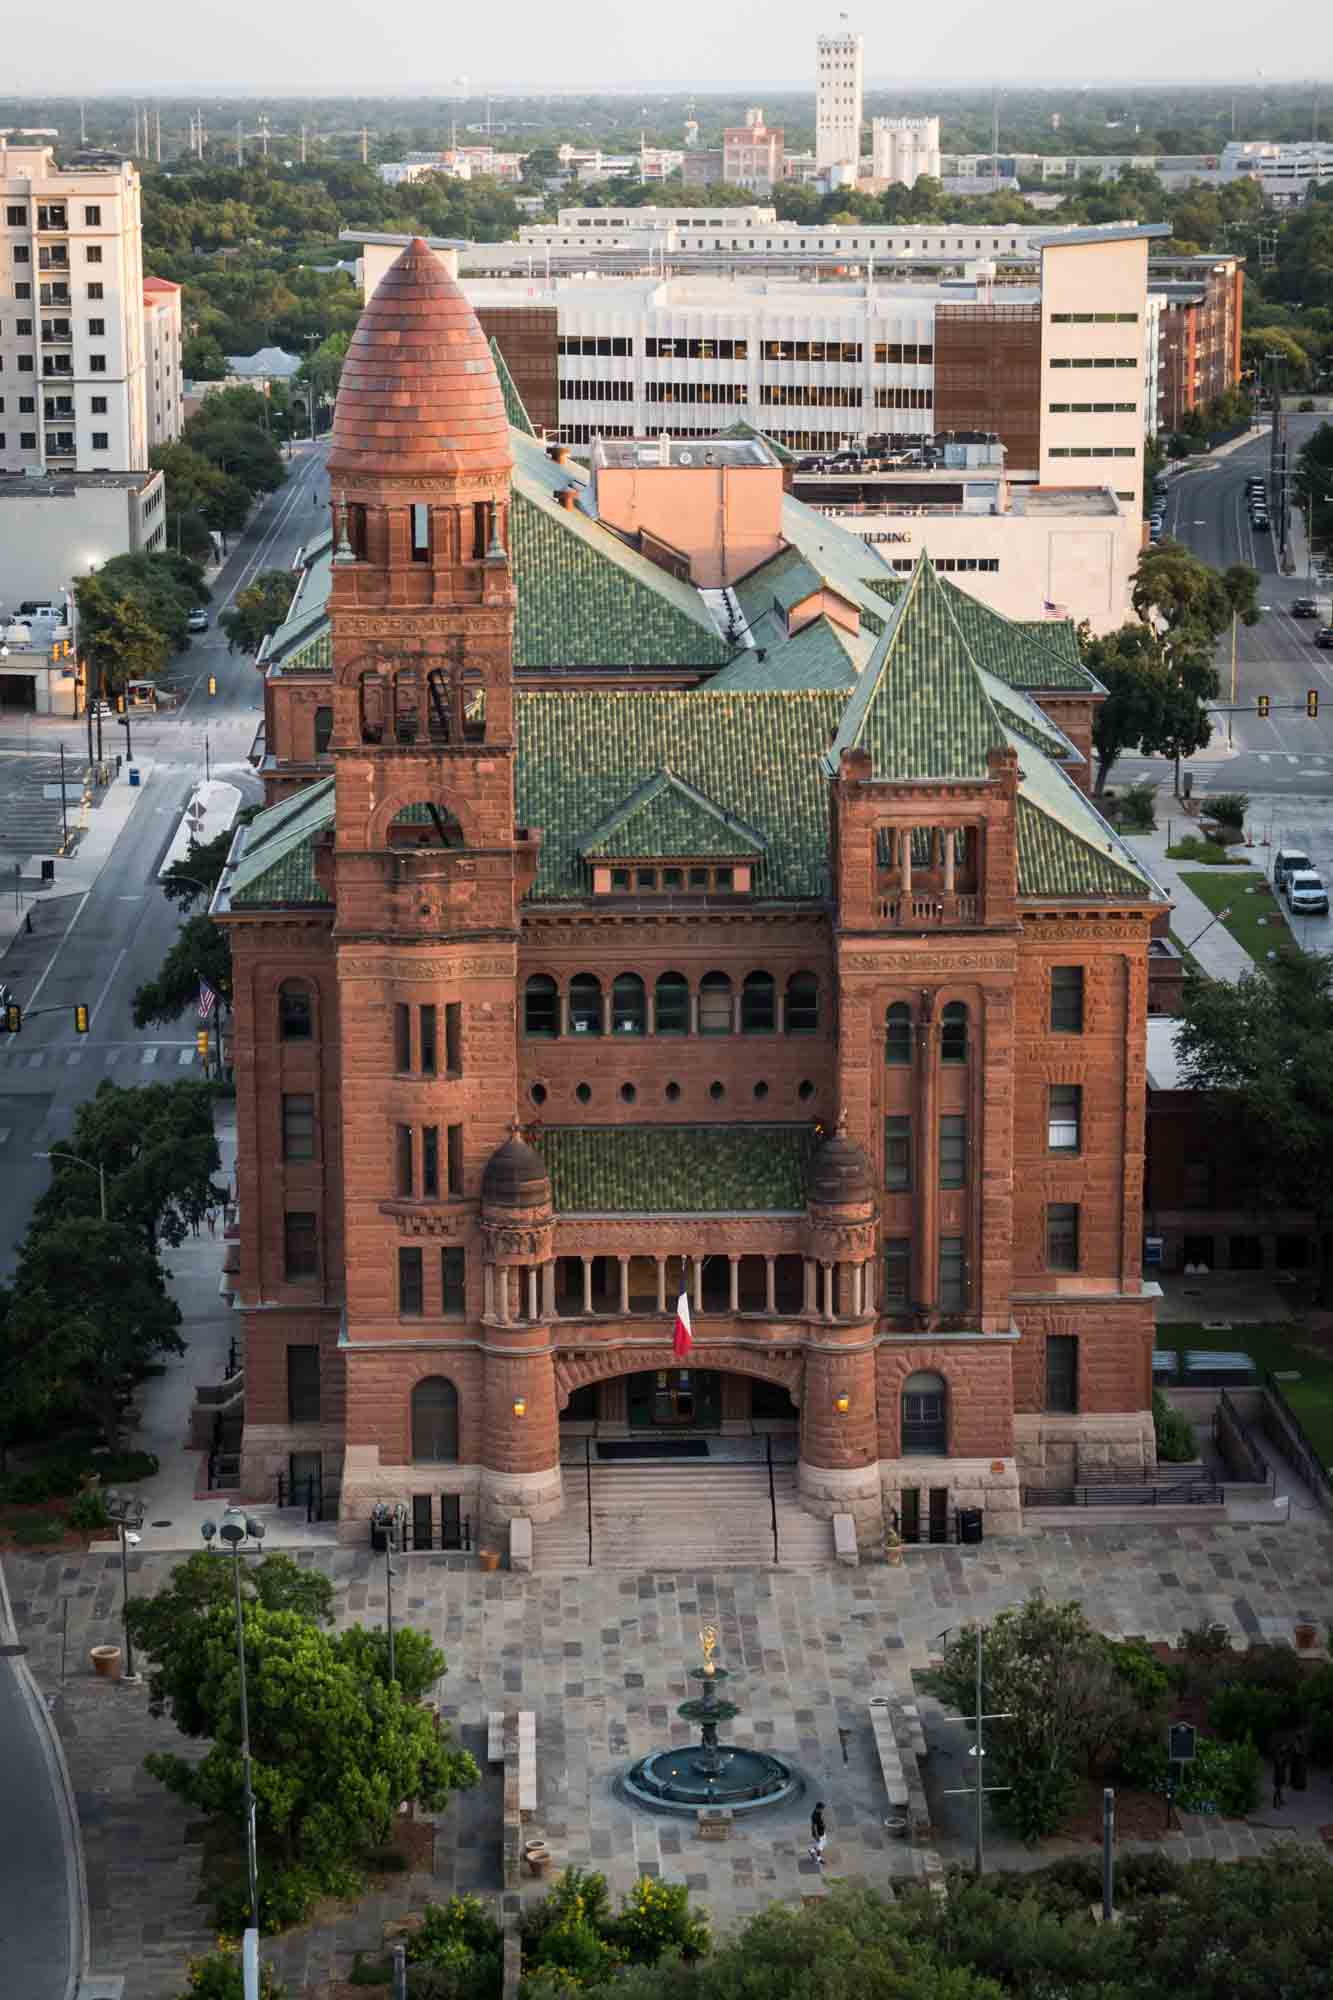 View from sky of Bexar County Courthouse and surrounding patio